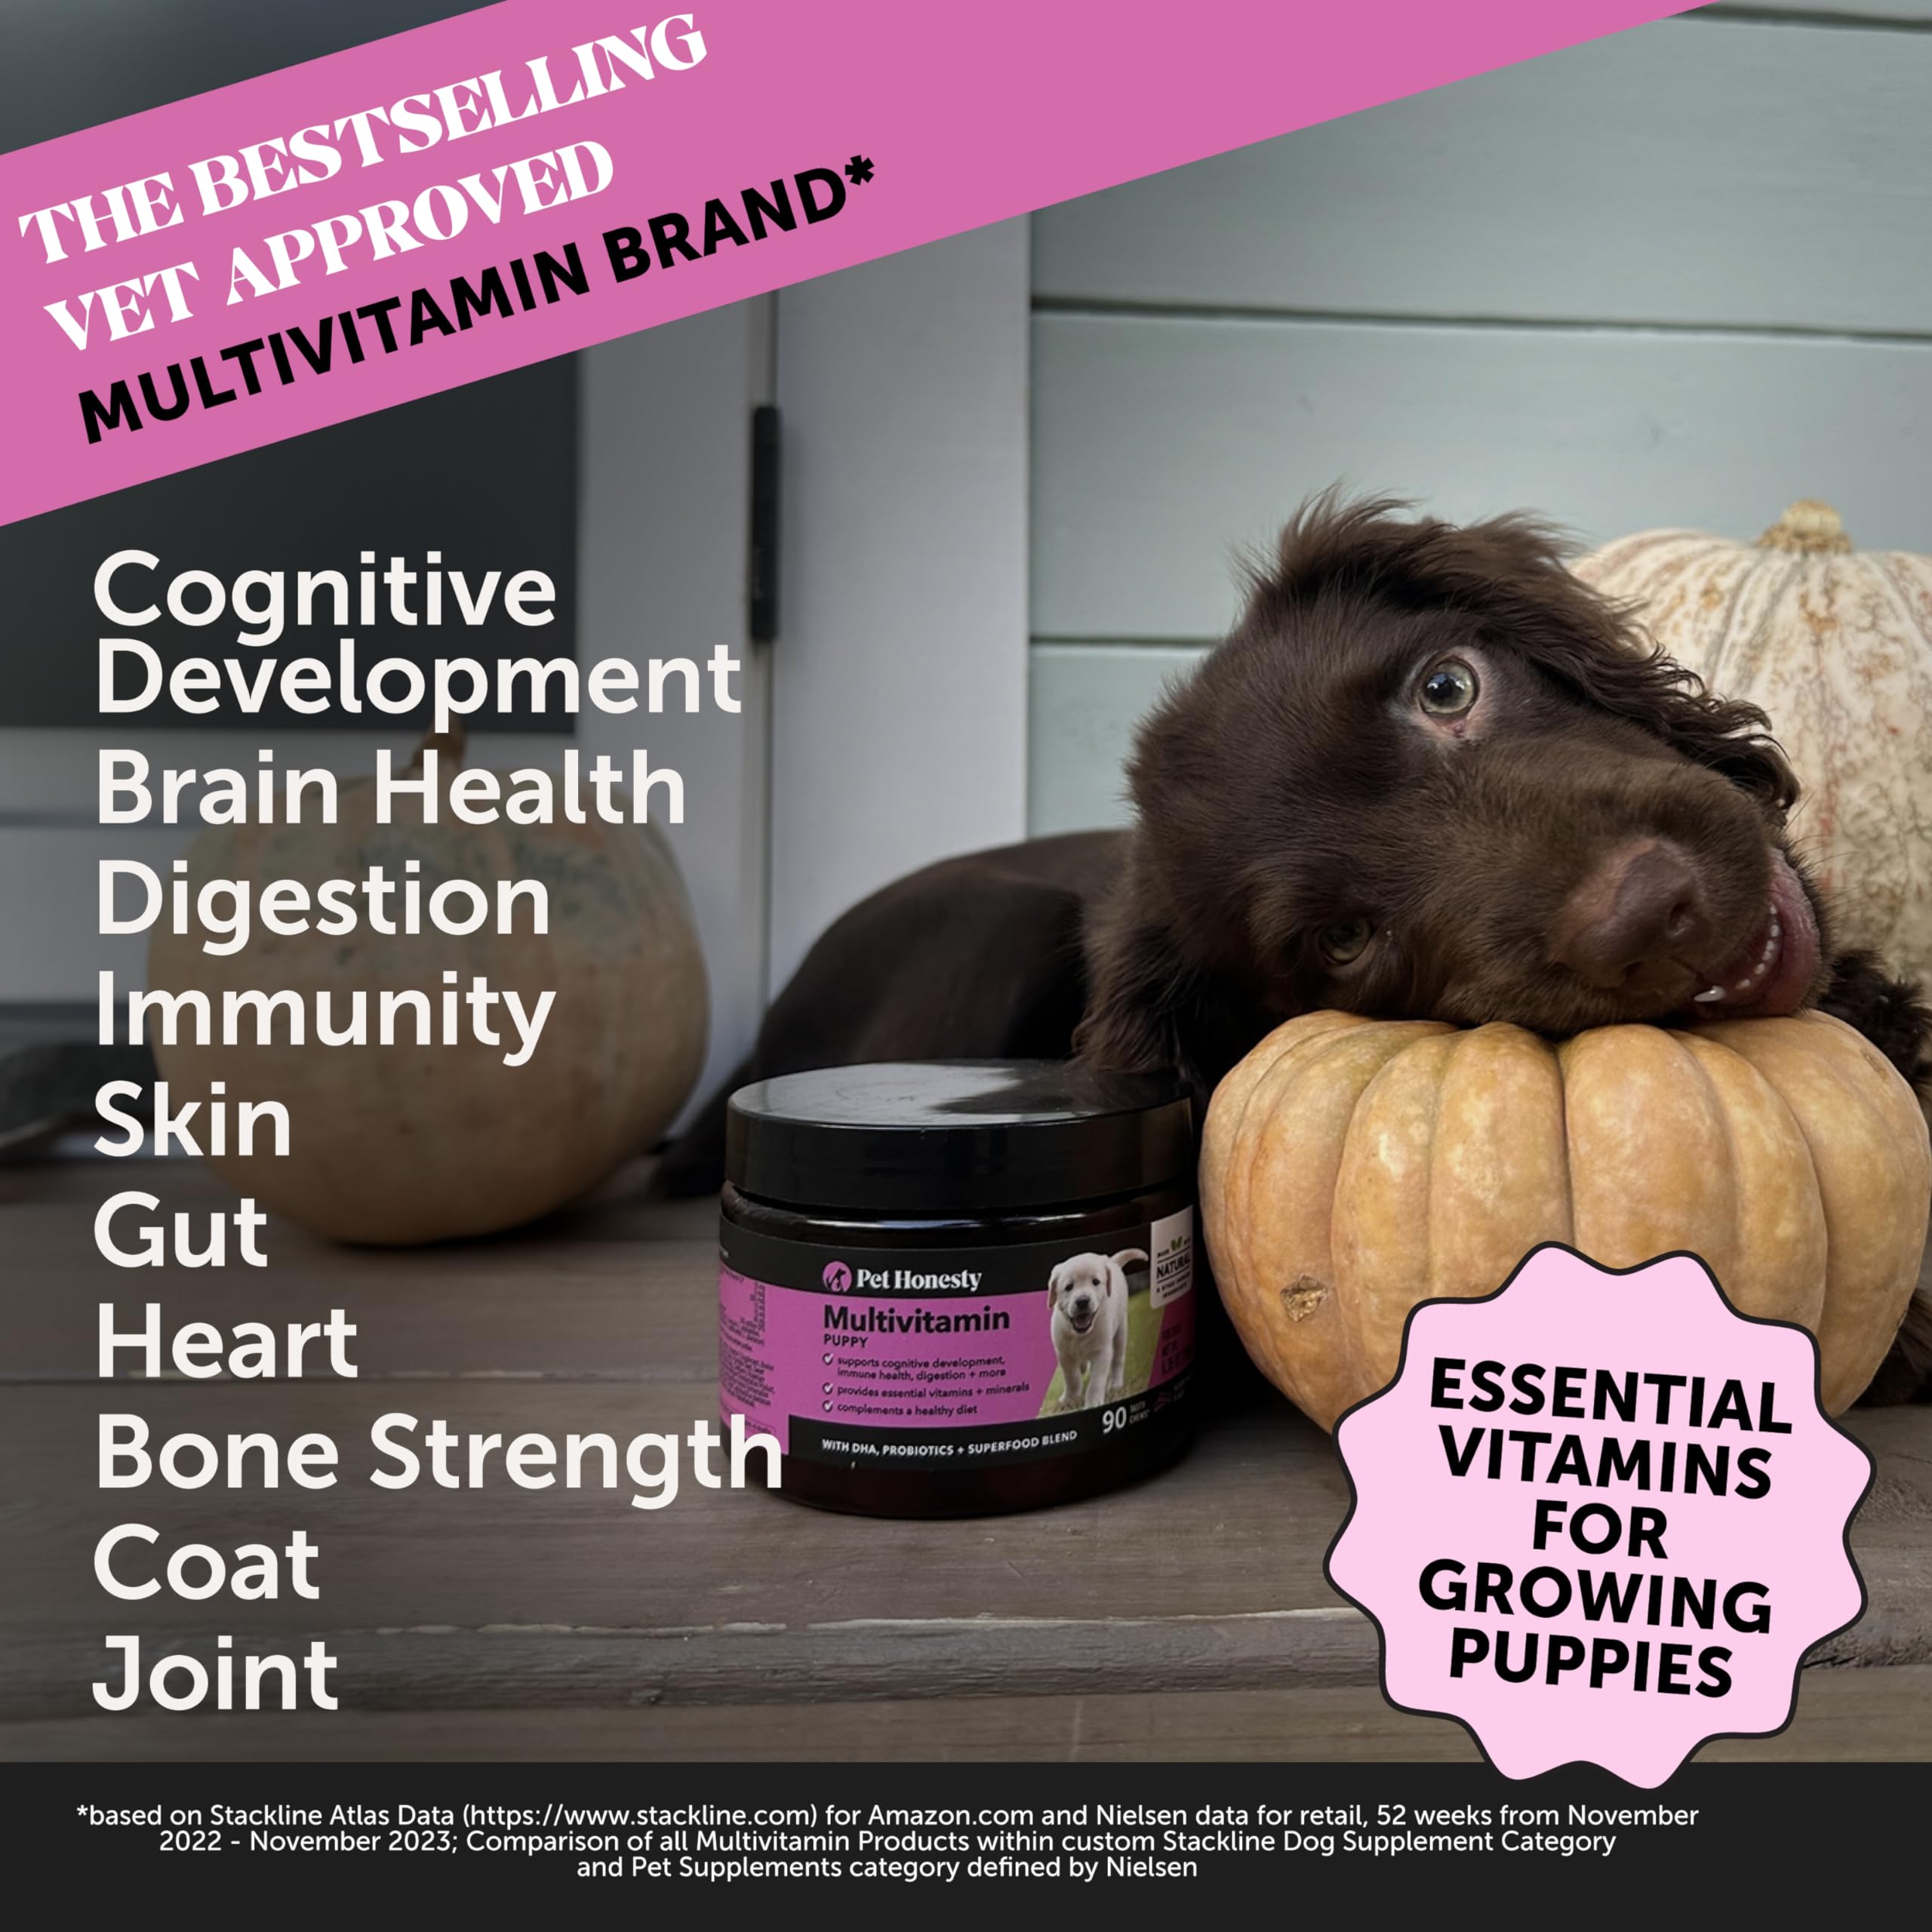 Pet Honesty Multivitamin Puppy Treats - Essential Dog Supplements & Vitamins for Learning and Cognitive Development- Probiotics, Omega Fish Oil for Health & Heart, Immune Health - Dog Health Supplies